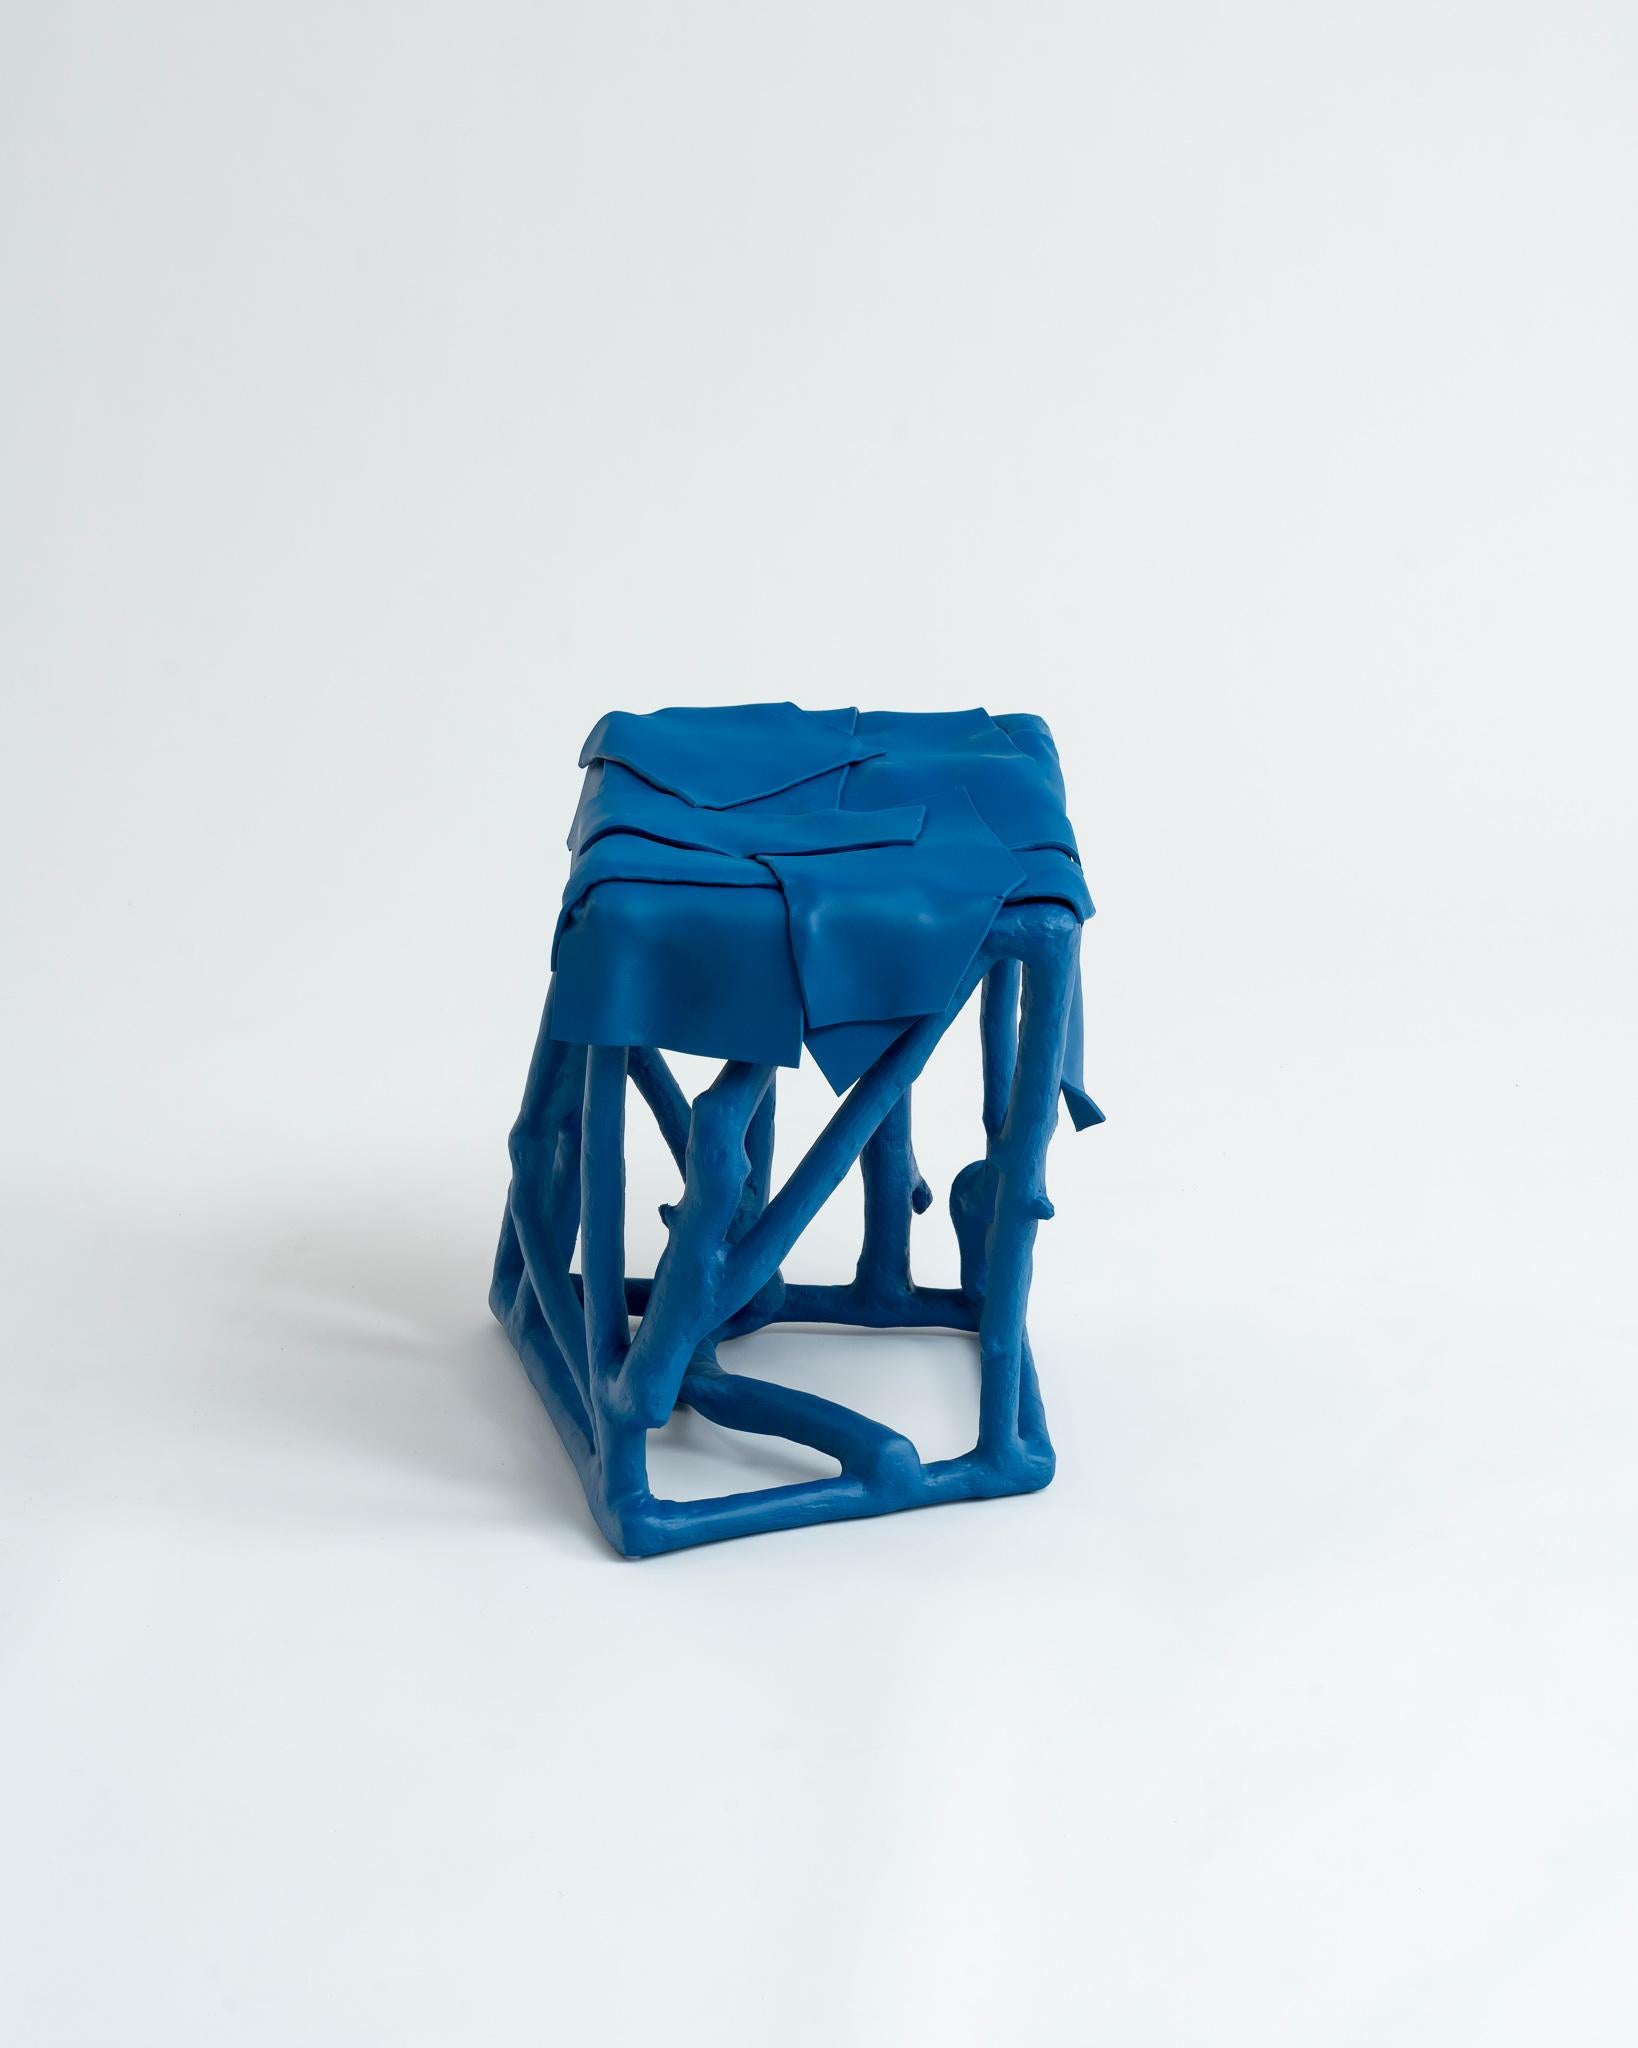 American Eclectic, One-Off Decorative Accent Table or Stool in Vivid Azure Blue For Sale